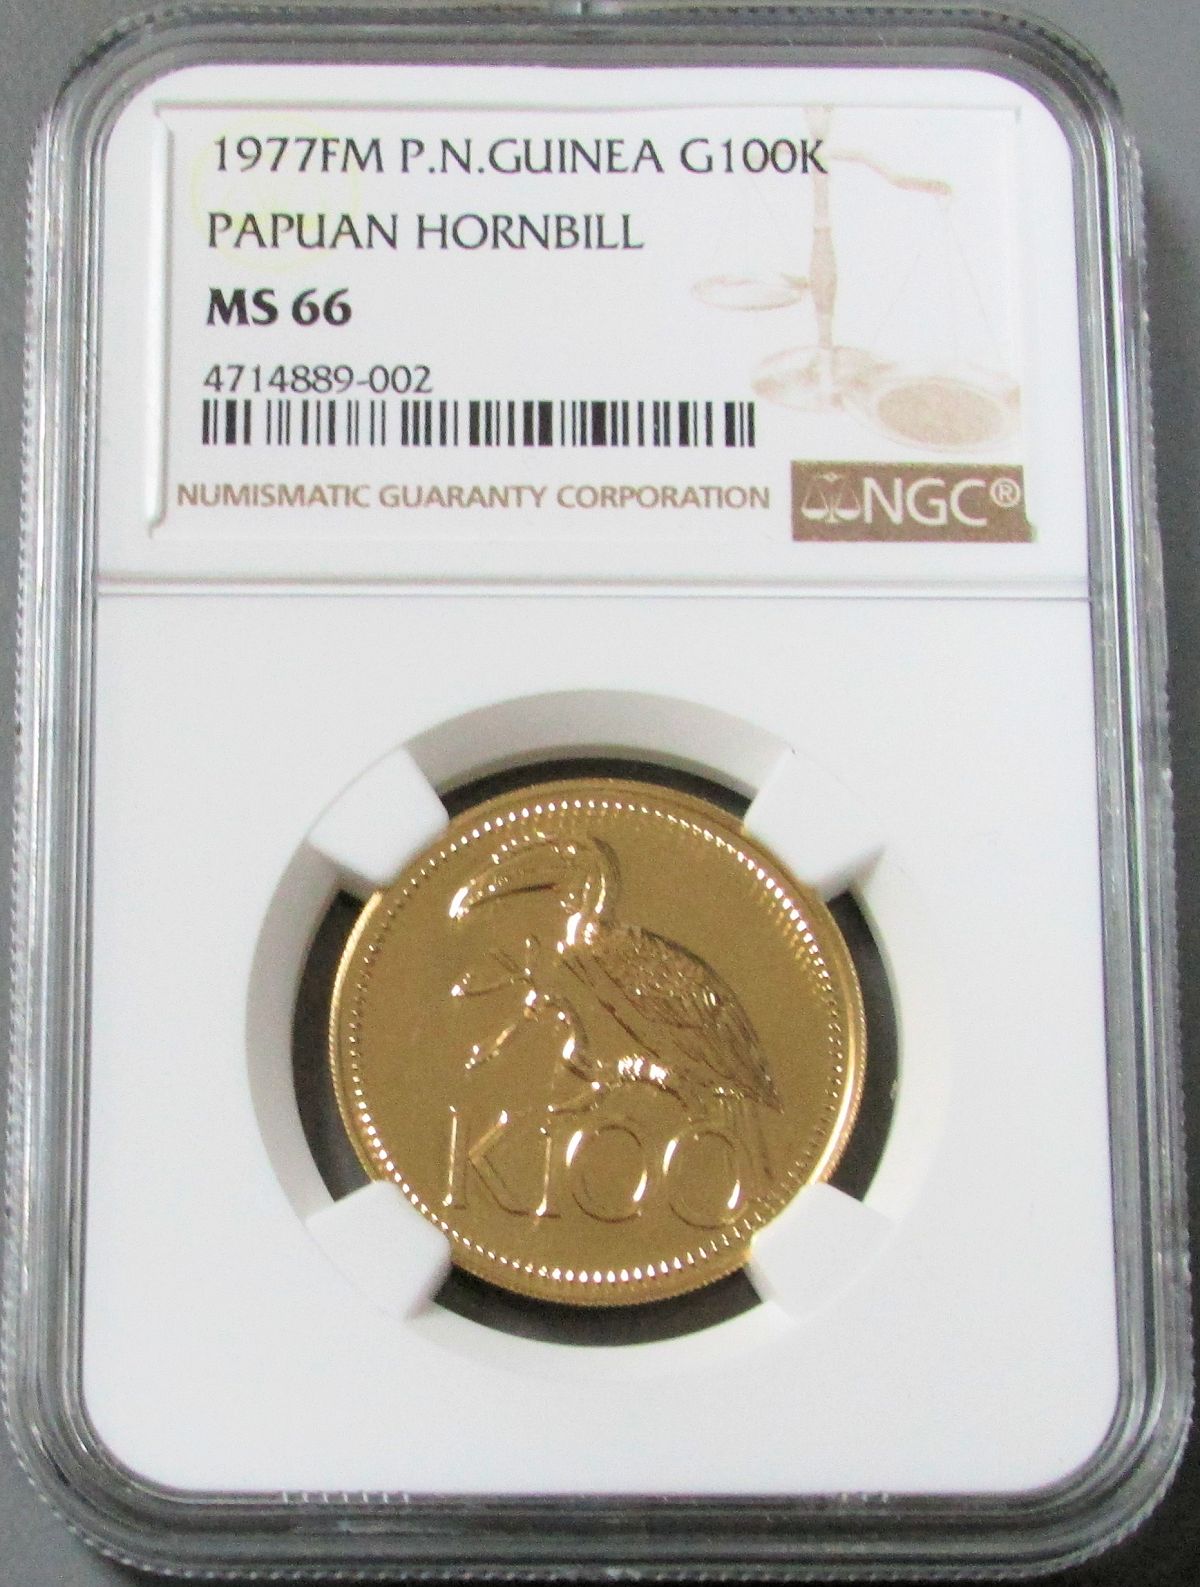 1977 FM GOLD PAPUA NEW GUINEA 100 KINA NGC MINT STATE 69 PAPUAN HORNBILL ONLY 362 MINTED